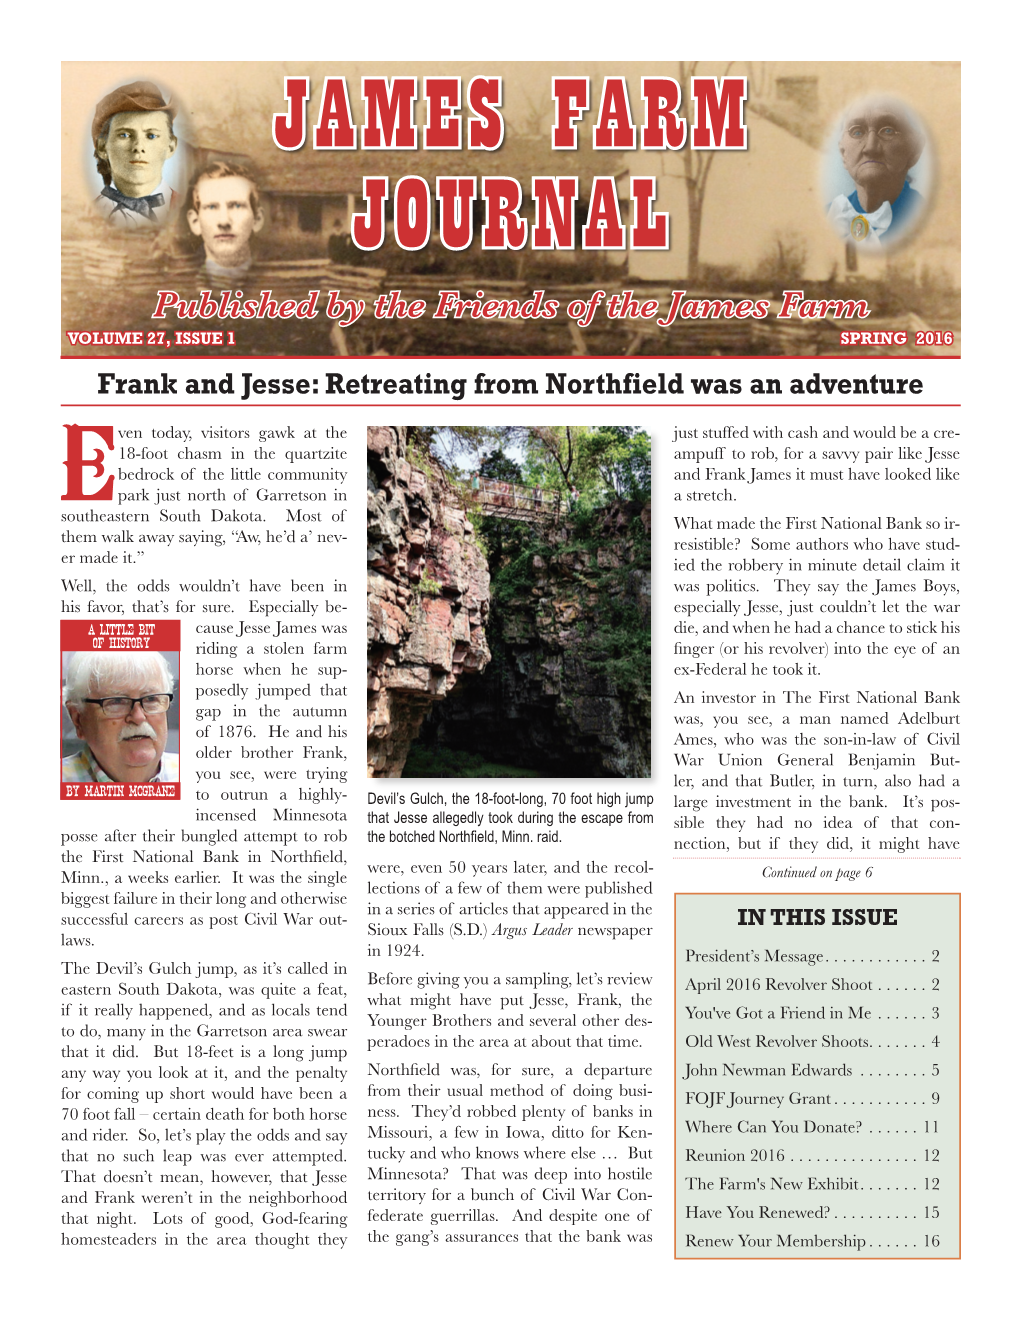 JAMES FARM JOURNAL Published by the Friends of the James Farm VOLUME 27, ISSUE 1 SPRING 2016 Frank and Jesse: Retreating from Northfield Was an Adventure